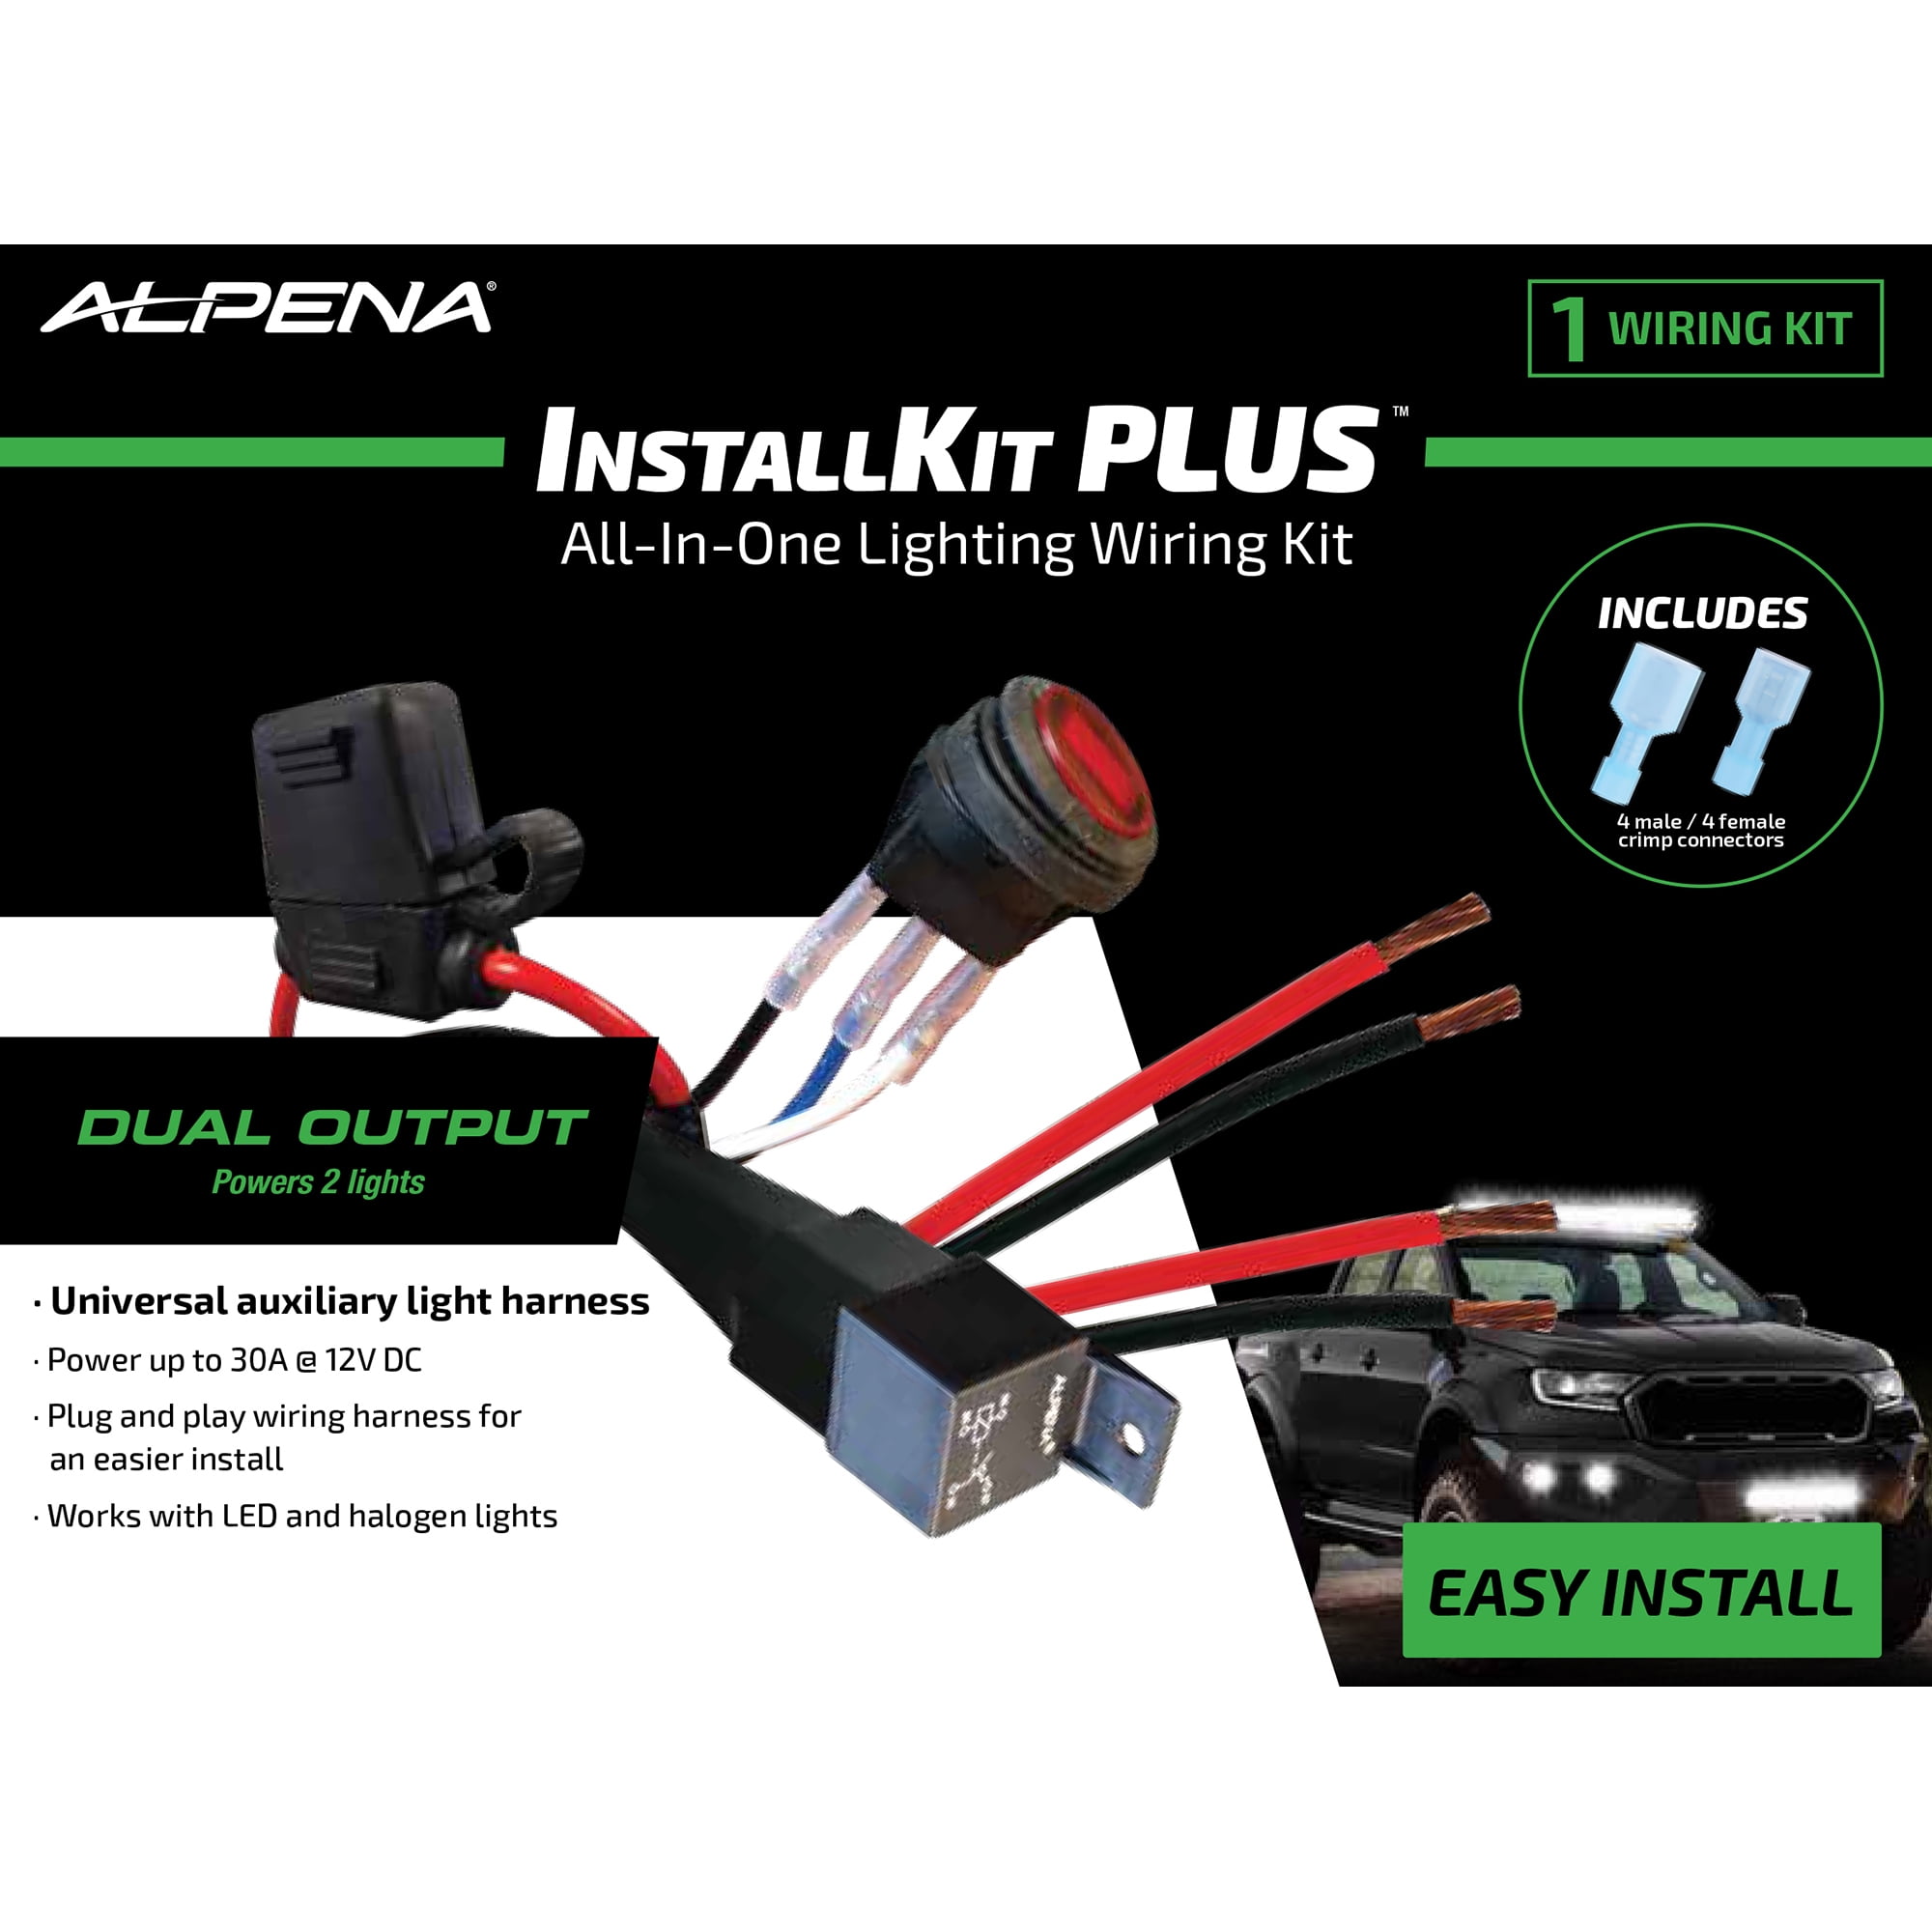 Alpena Install Kit Plus, Illuminated Interior Switch, Inline Fuse Holder, Relay, 12V System, Model 77631, Universal Make/Fit Type for Cars, Trucks and SUVs